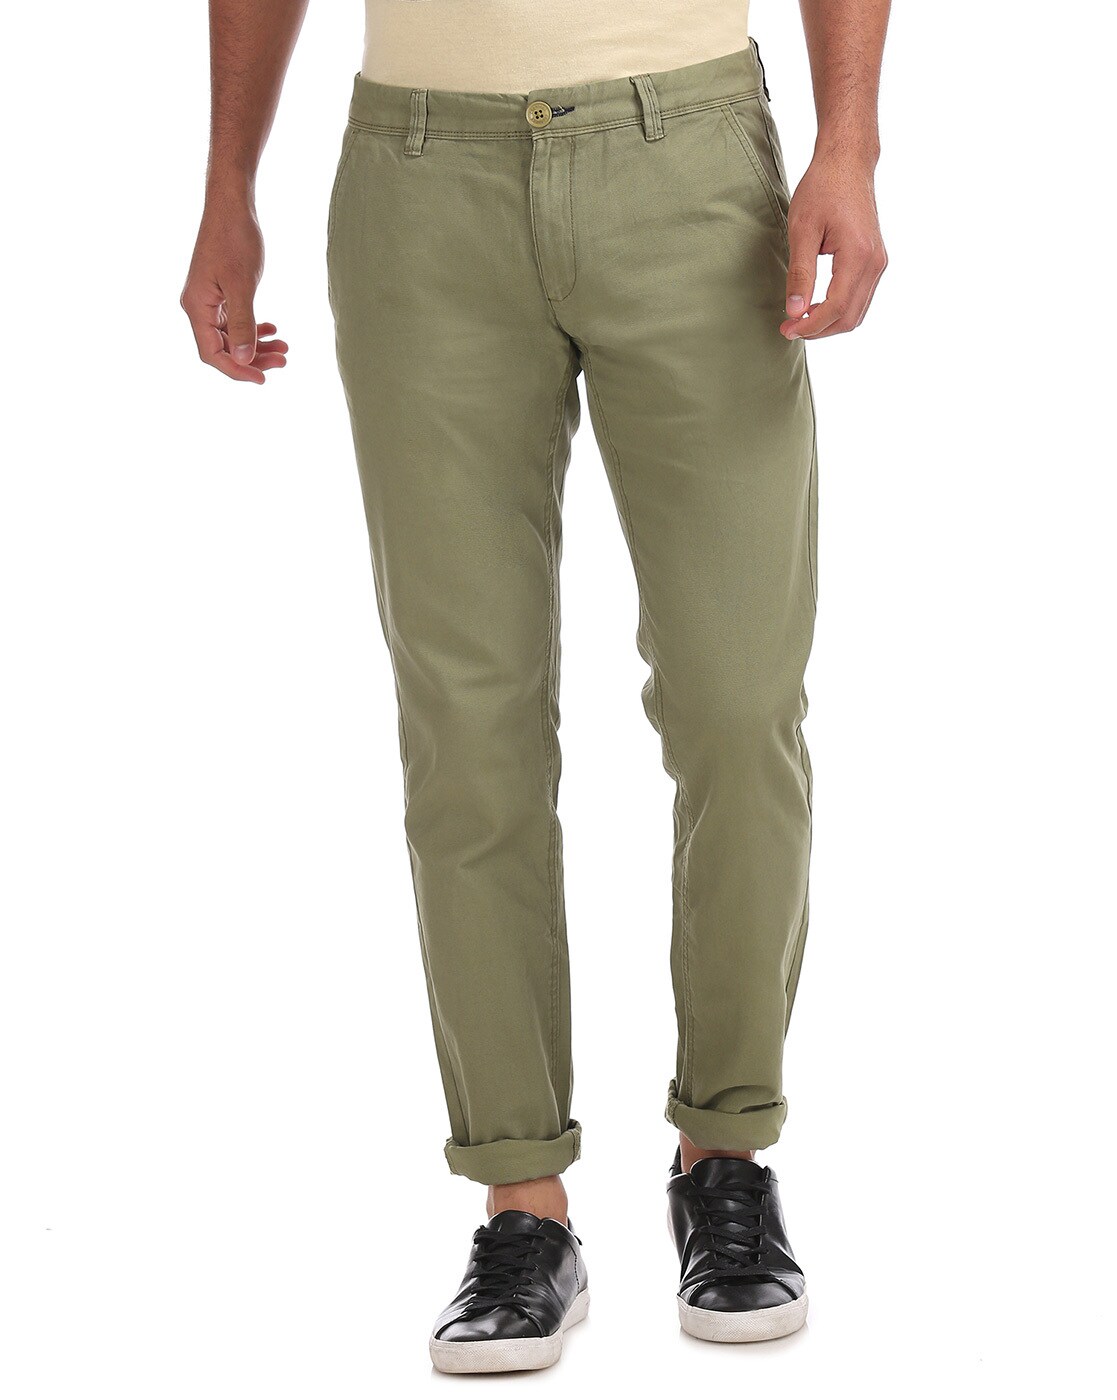 Solid Beige Relaxed Fit Cotton Pants  Vishnu